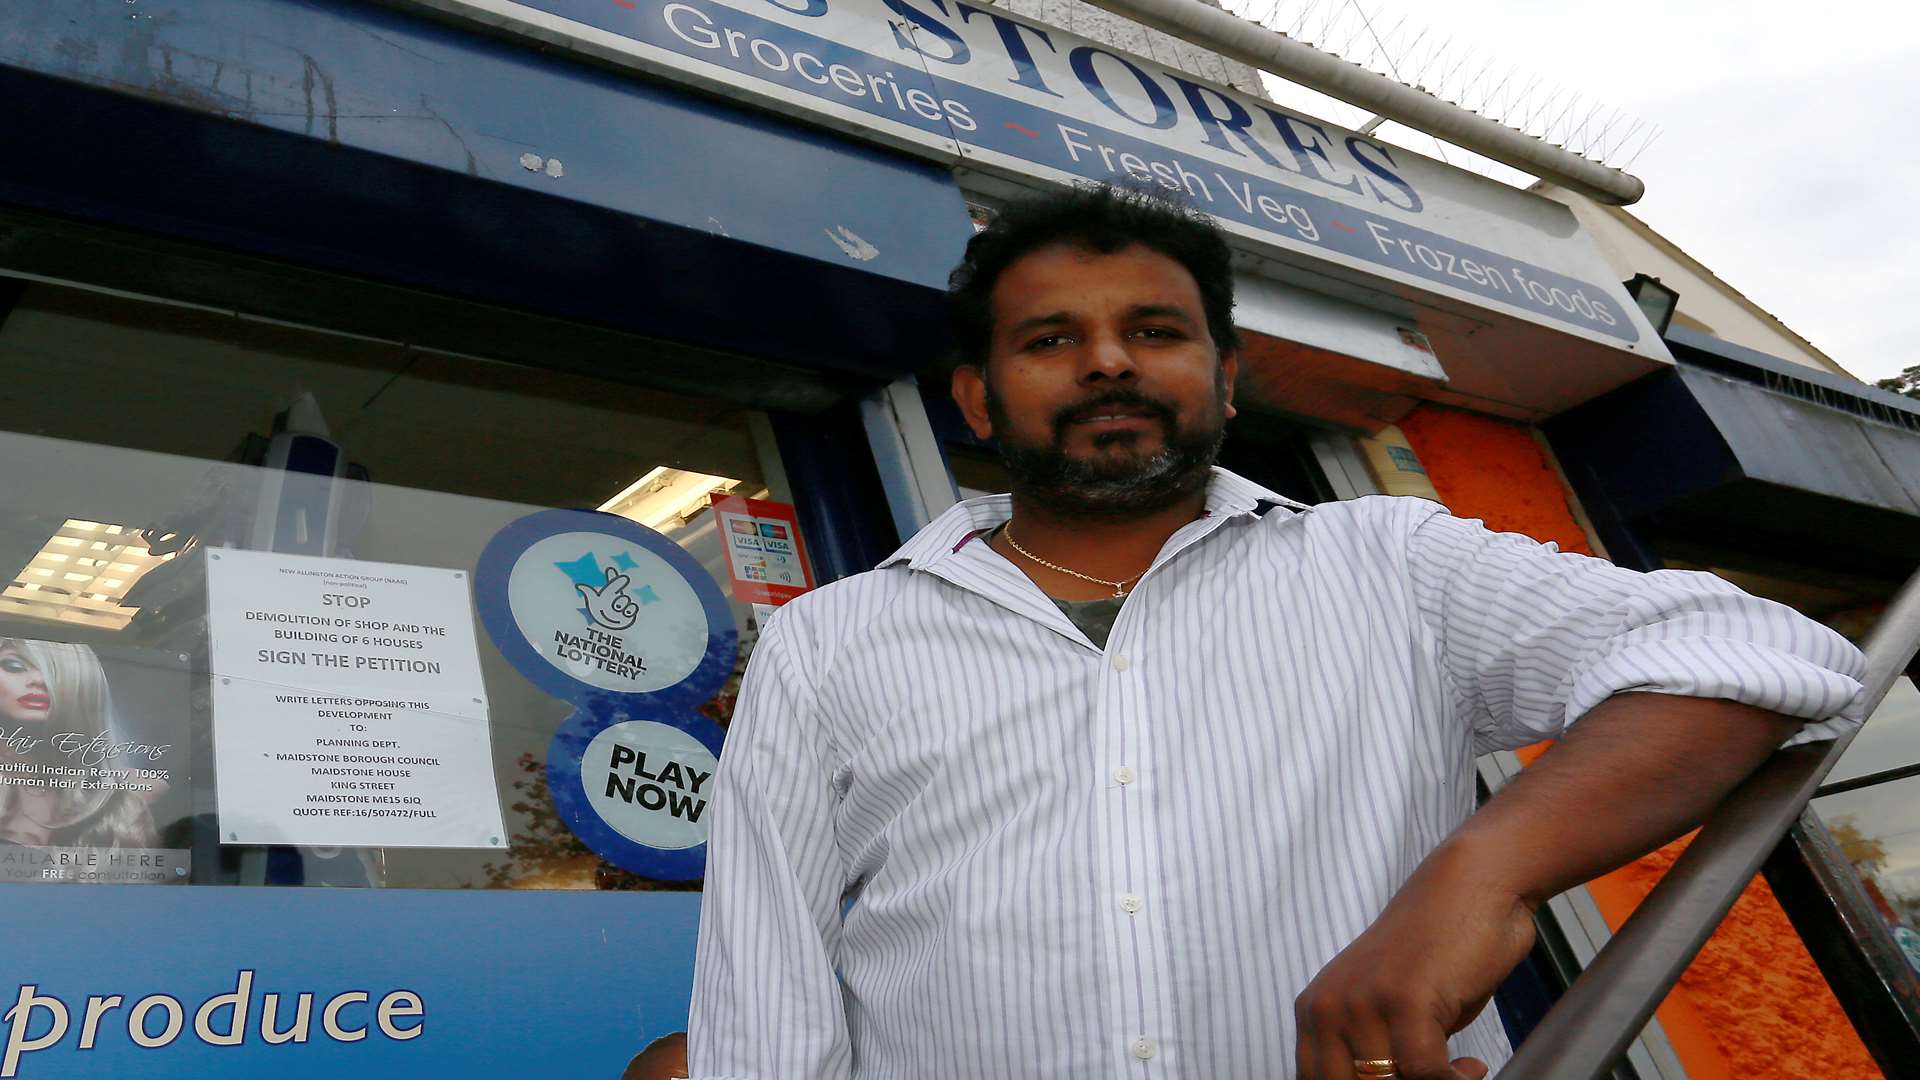 Jeyaprakash Selvarajah is the shop manager of the Payless store